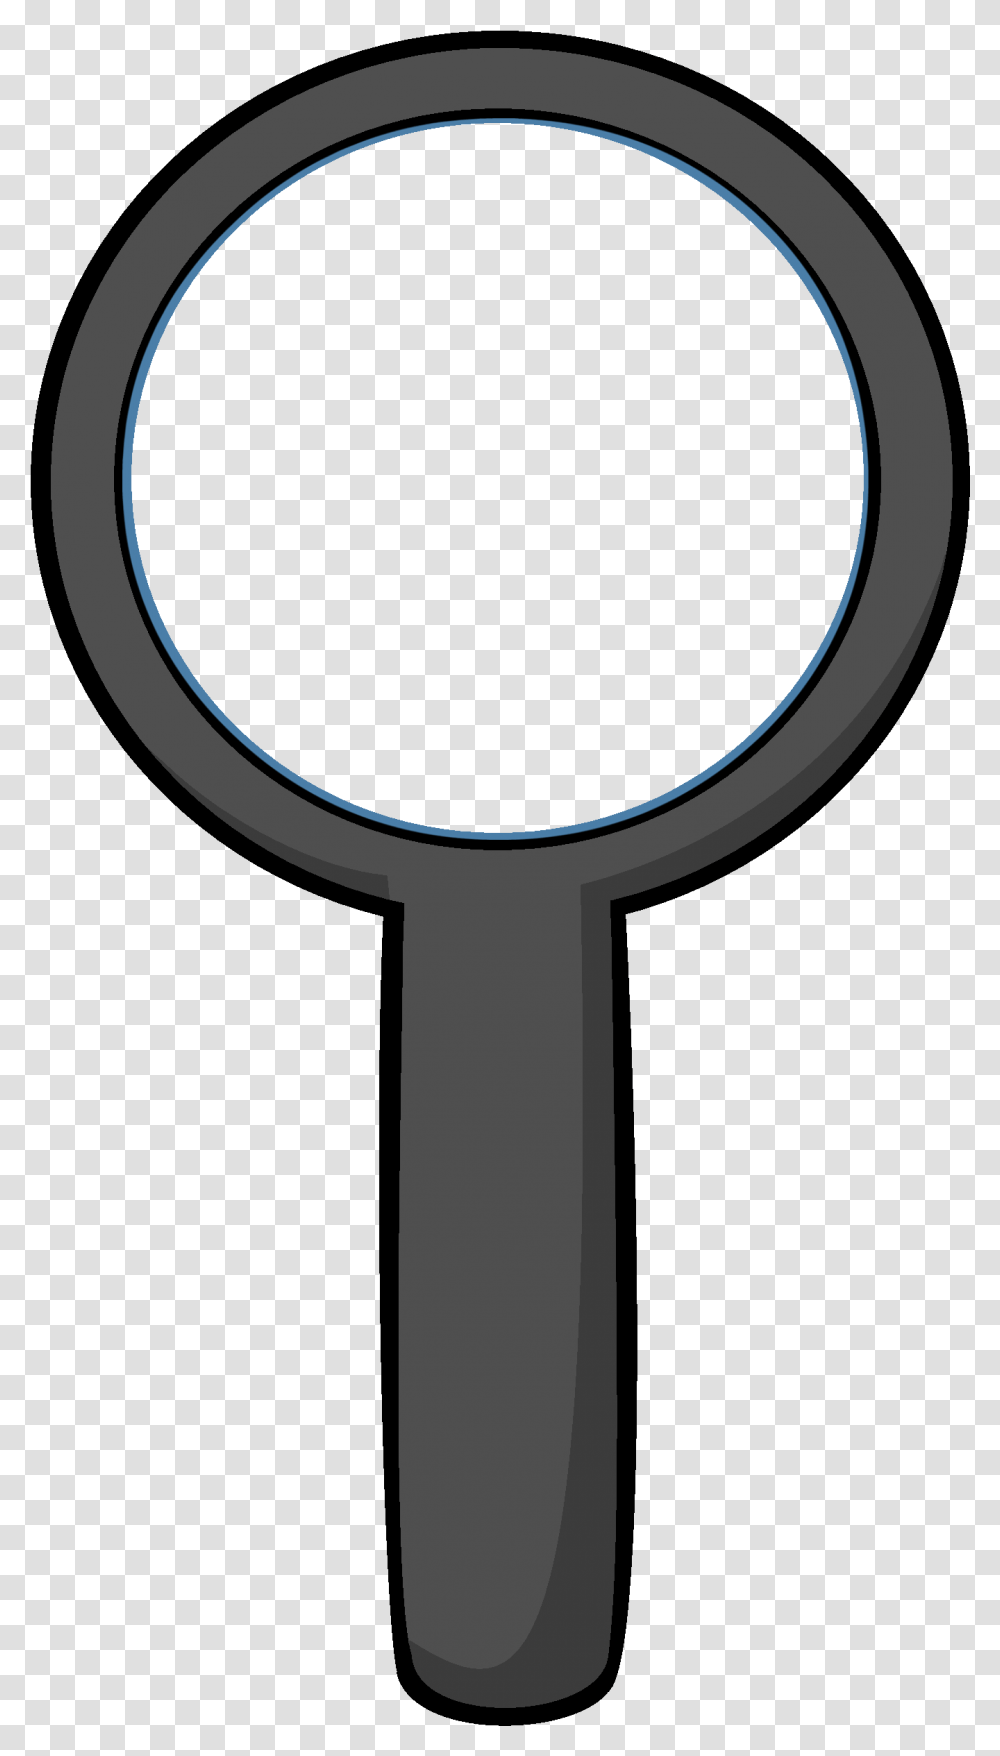 Magnifying Glass No Glass Object Shows Magnifying Glass Transparent Png